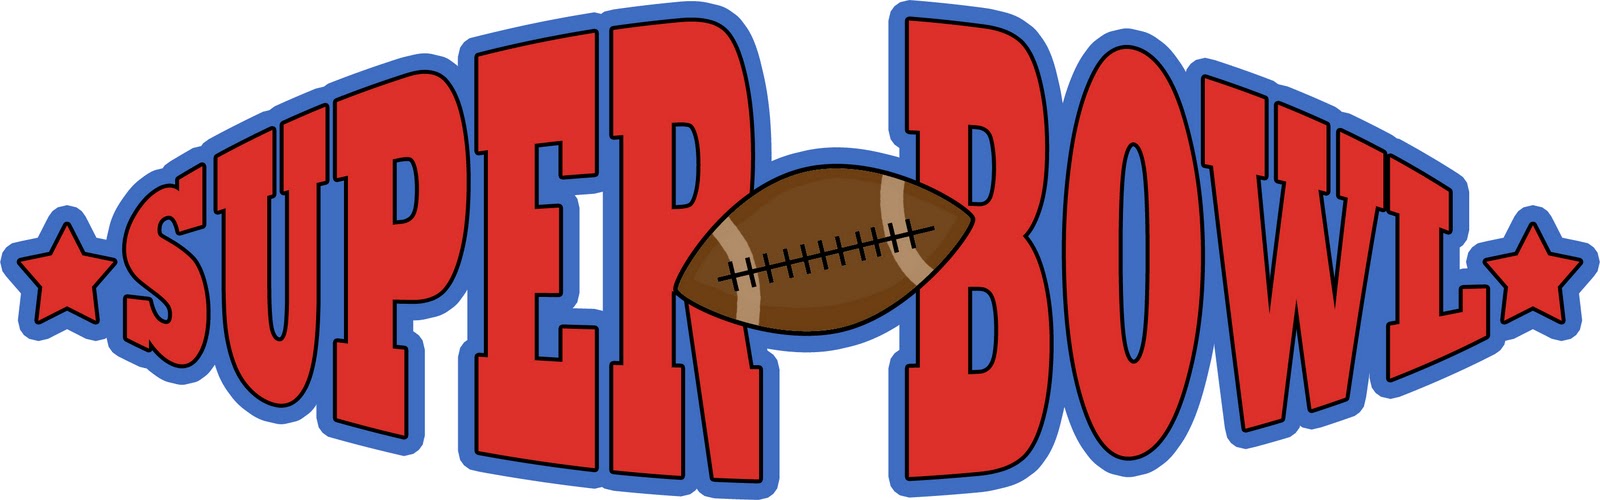 ... Clipart Super Bowl Football Banner: Colorful Banner with a football and stars Bright red text